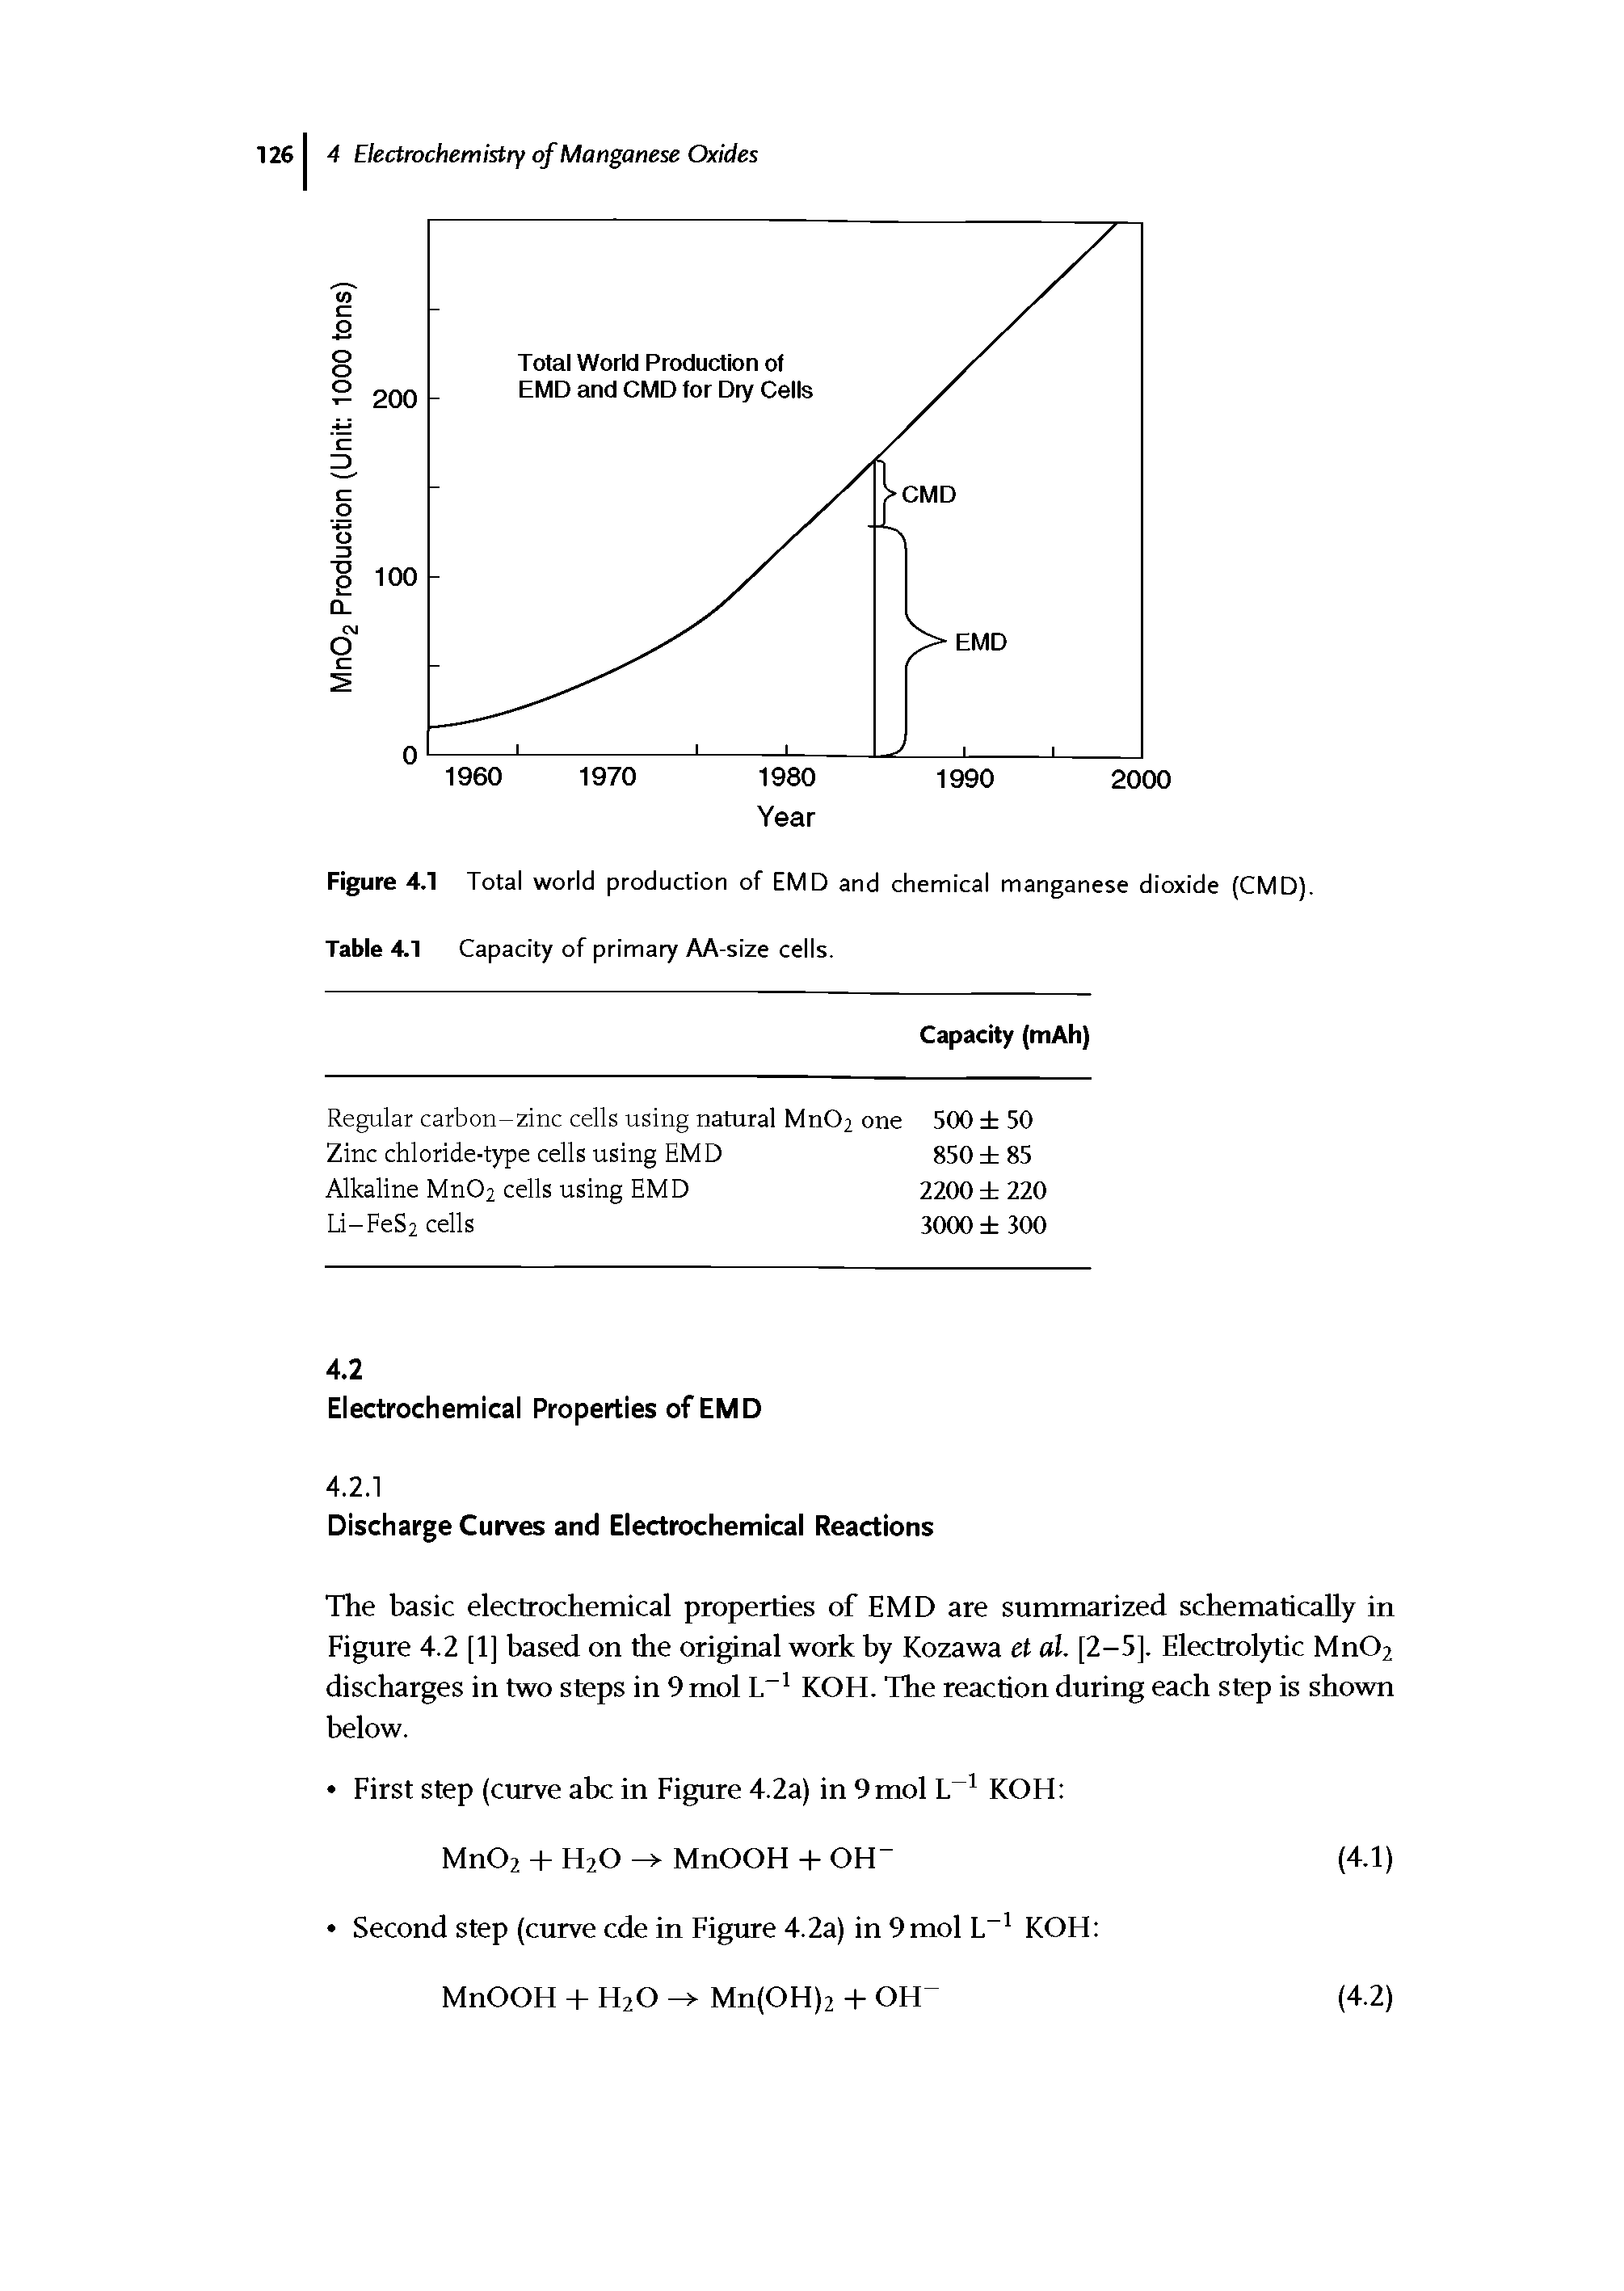 Figure 4.1 Total world production of EMD and chemical manganese dioxide (CMD). Table 4.1 Capacity of primary AA-size cells.